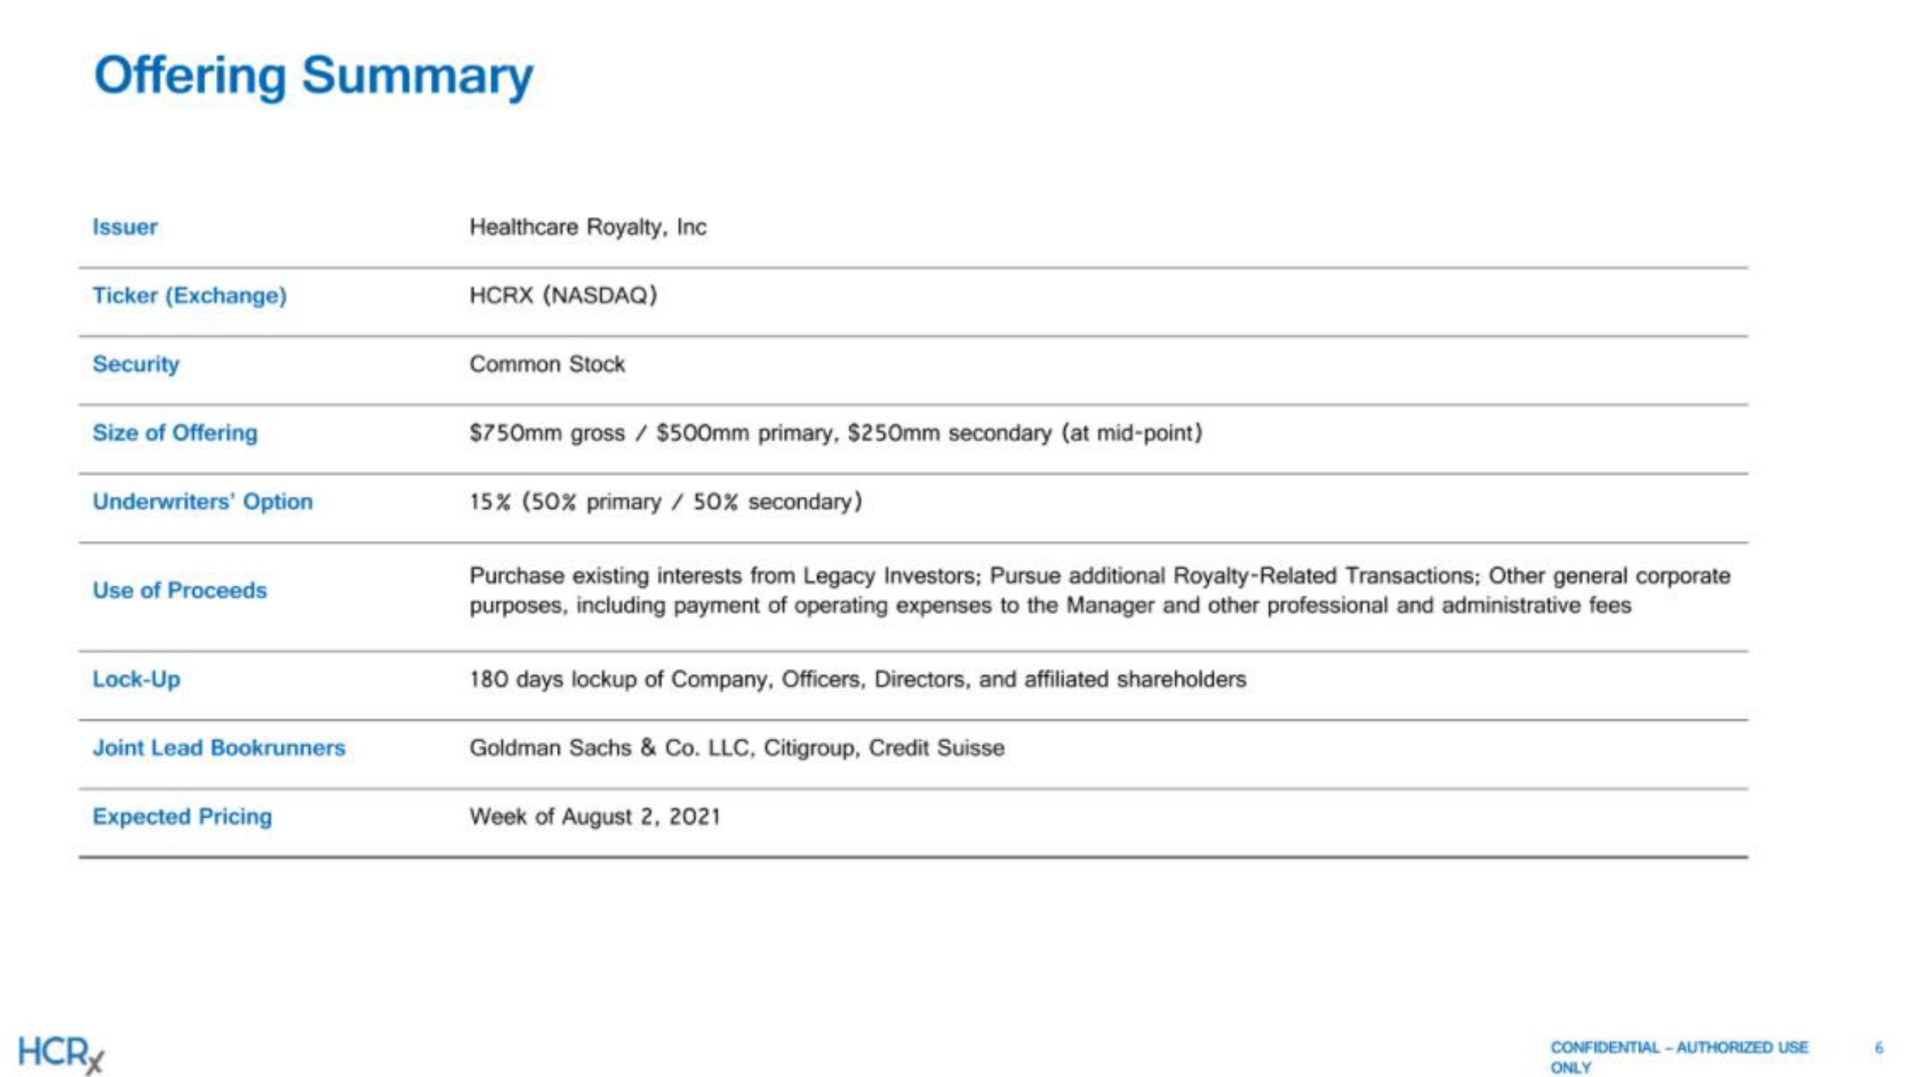 offering summary | Healthcare Royalty